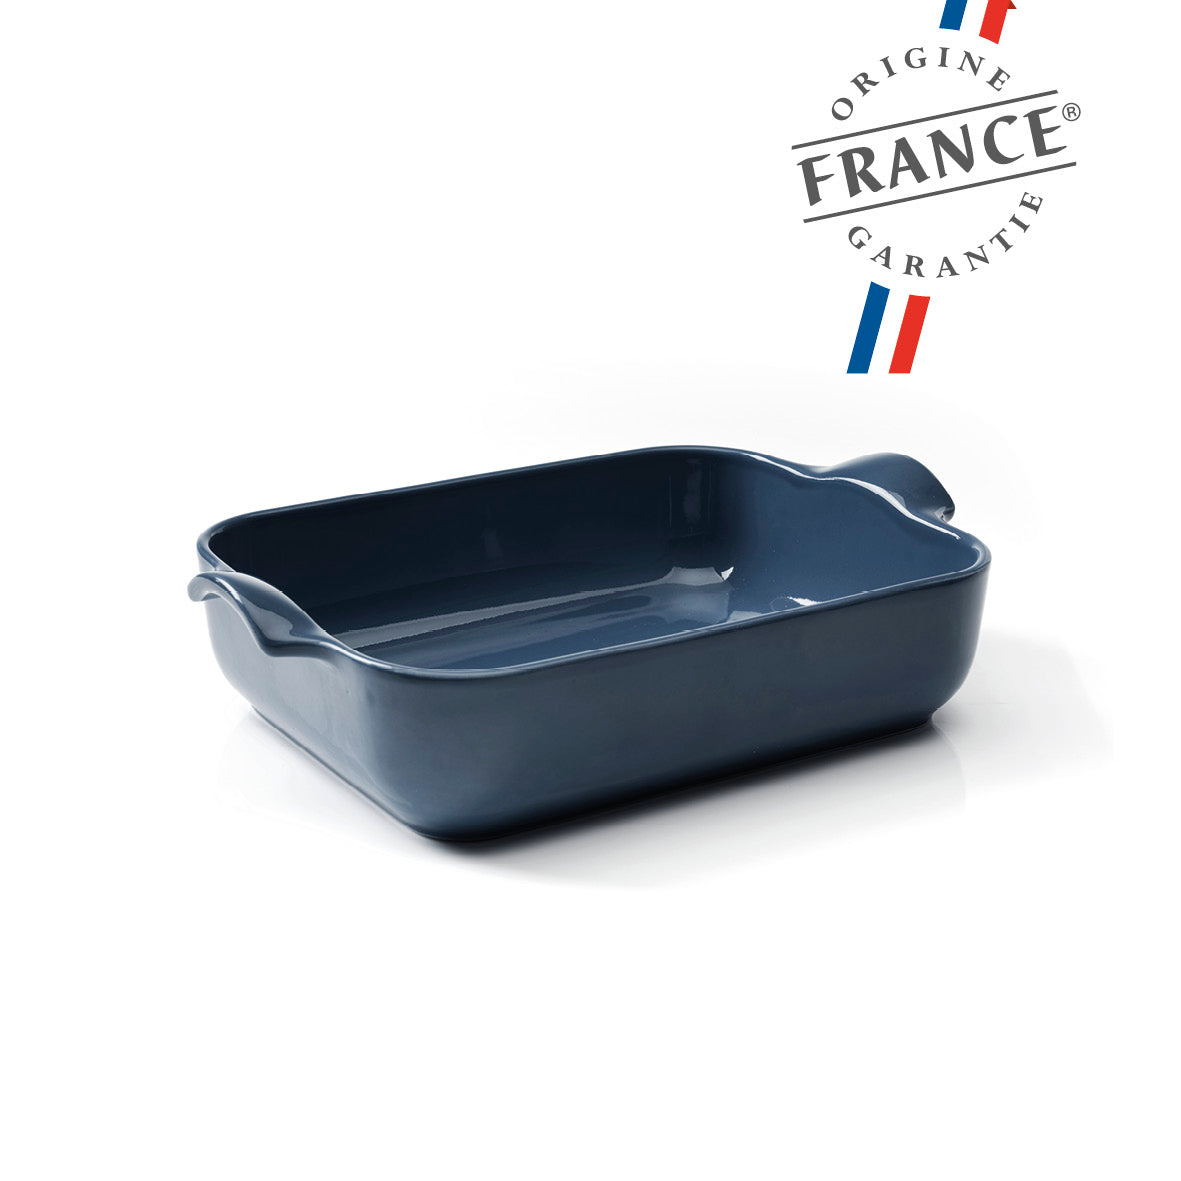 Ceramic oven dish - Made in France - 5L - 6-8 people Blue